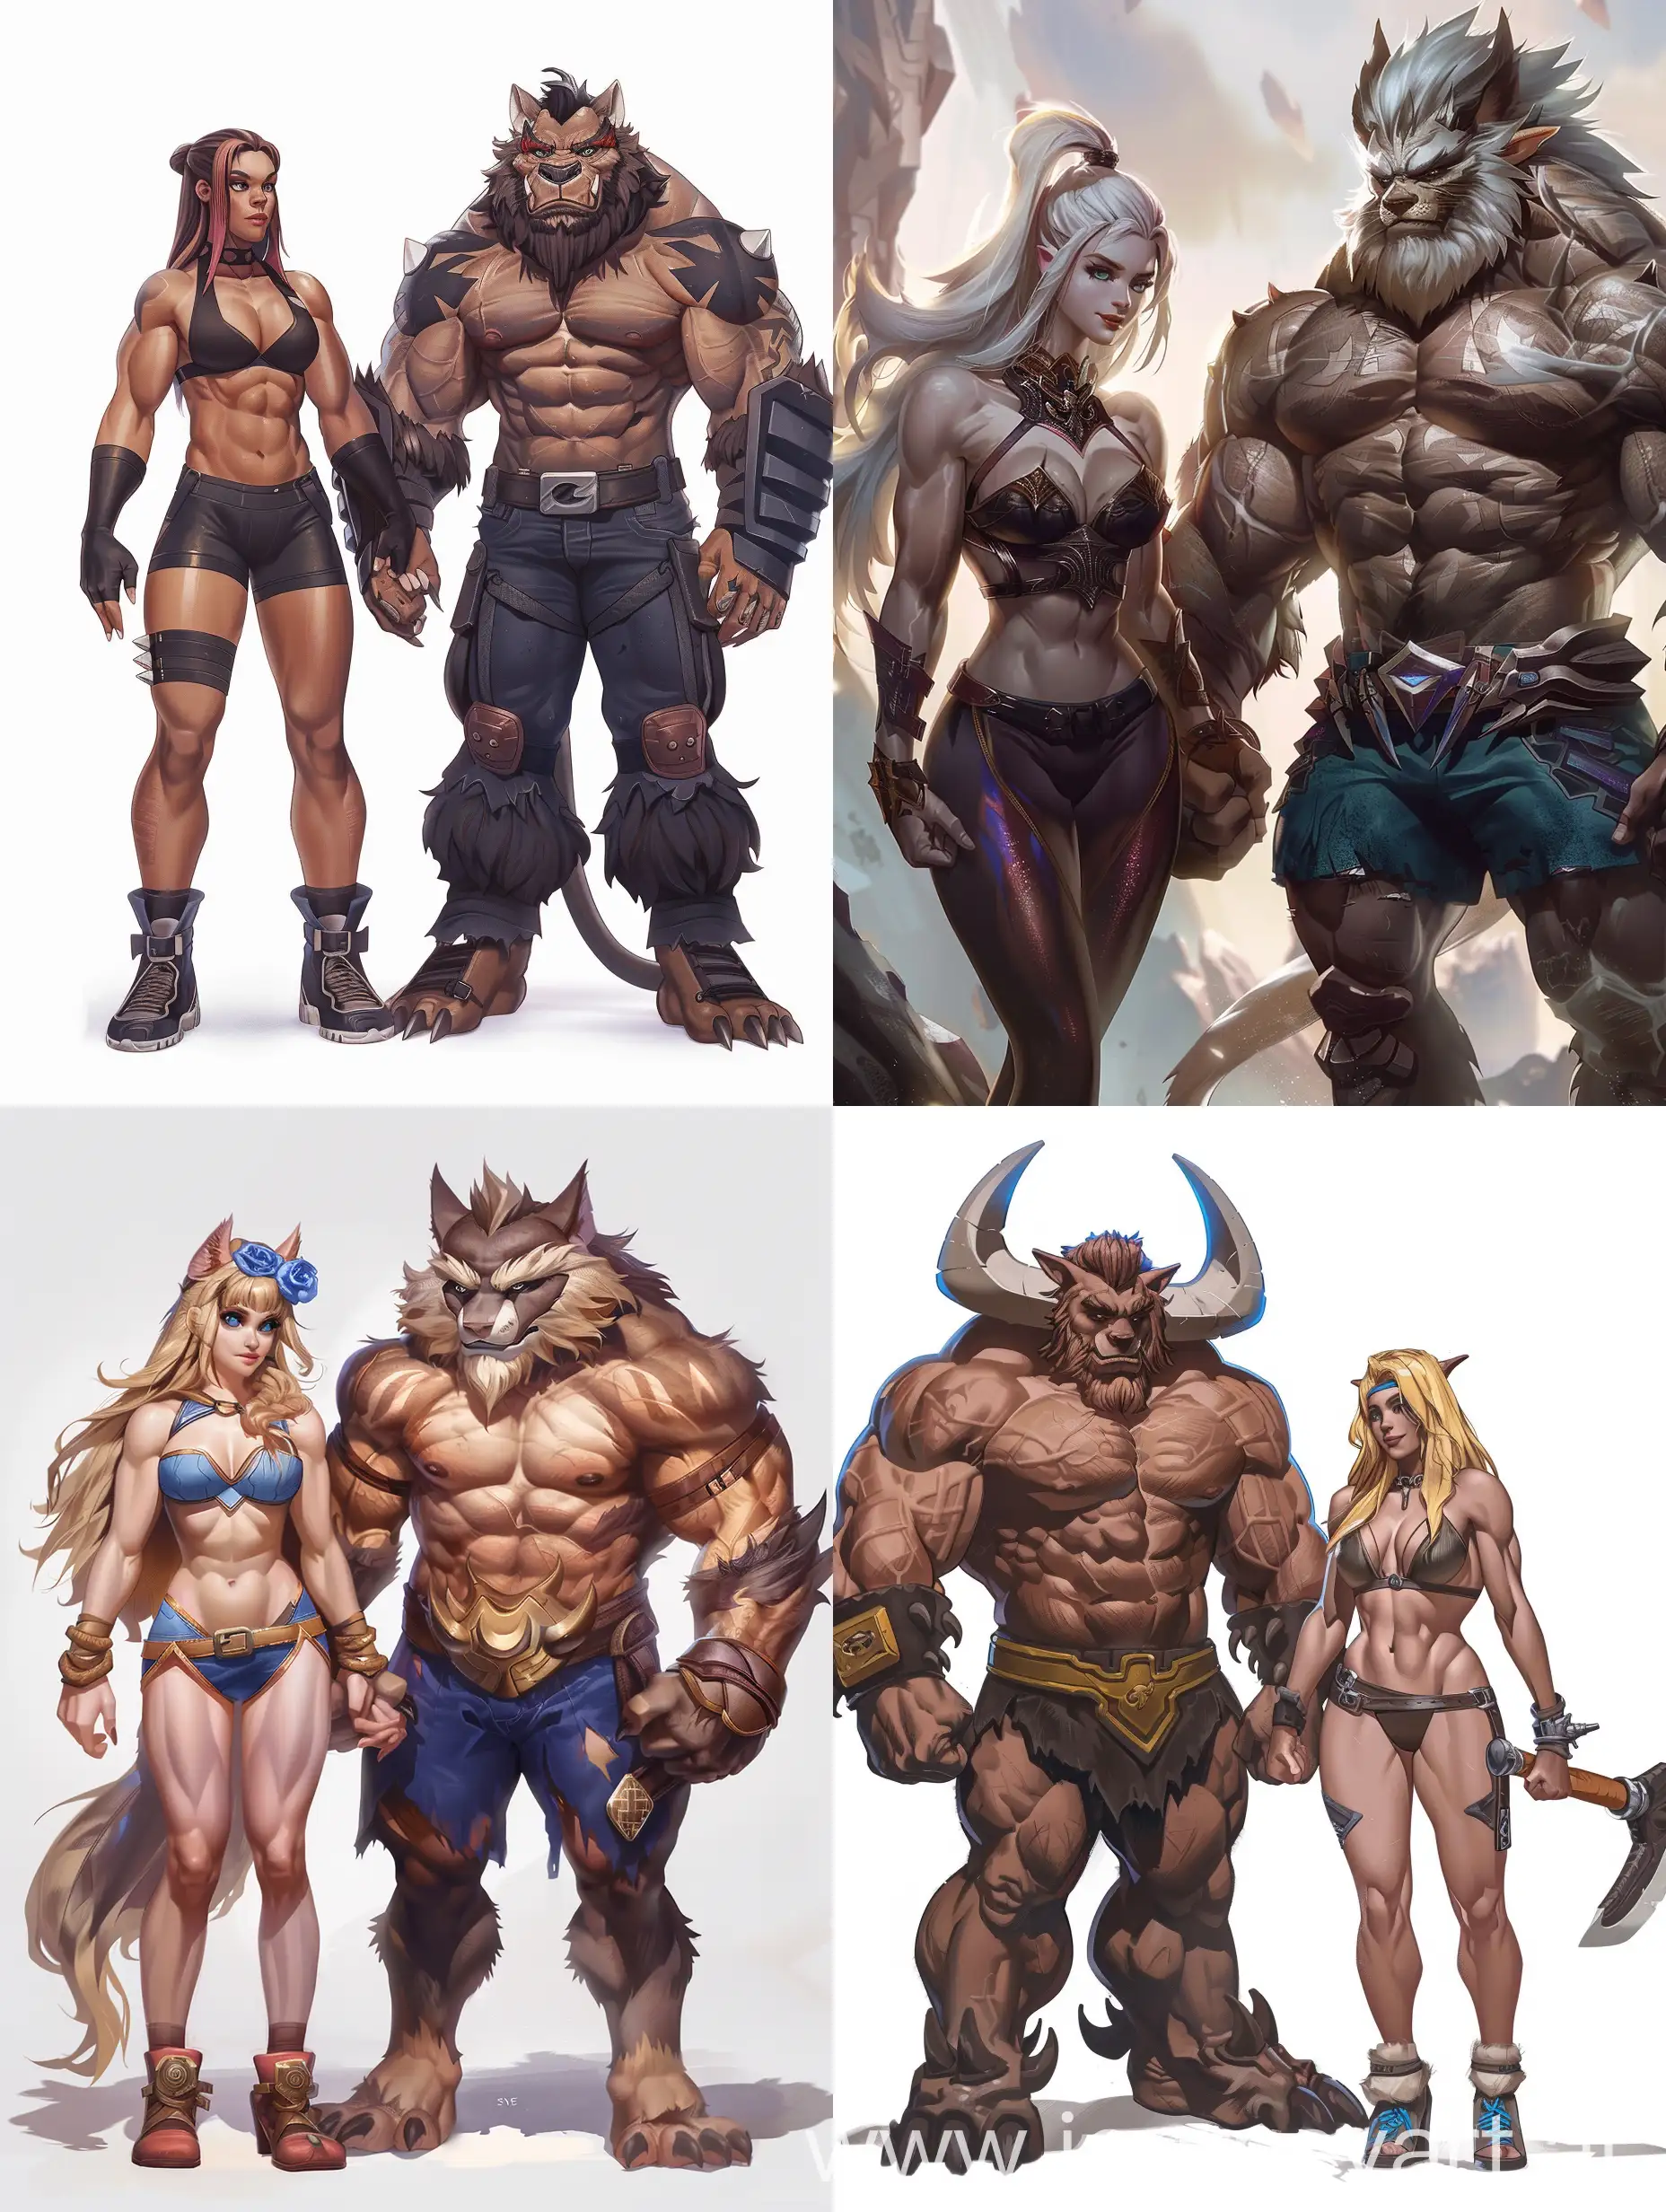 cool aestetic bodybuilders coupe of female and male beast holding hands looking at the camera
 full size league of legends style